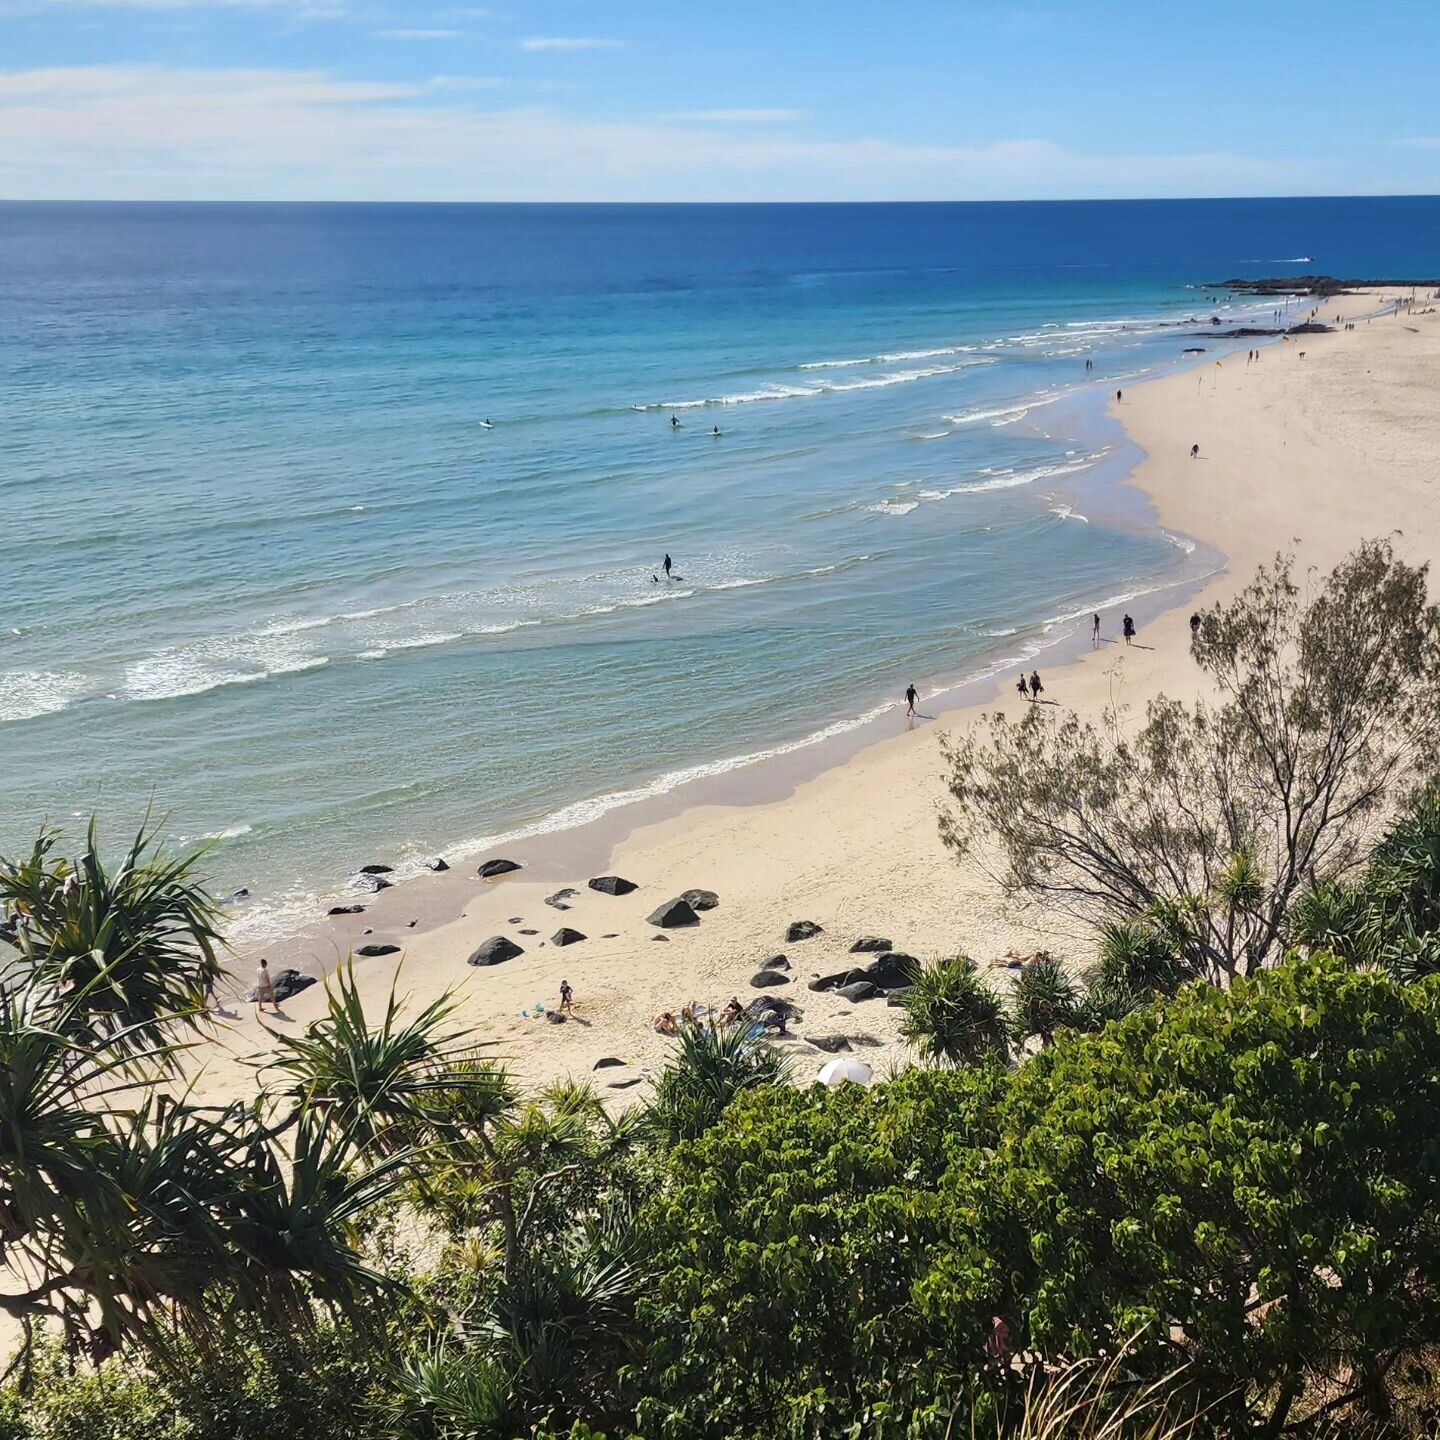 The winters out of Victoria really are something. If you need a break from the cold weather, let us help you with a trip up North and experience this gorgeous Sunshine. Visit www.adventurecaravanhire.com.au and book your trip now.

#adventurecaravanh